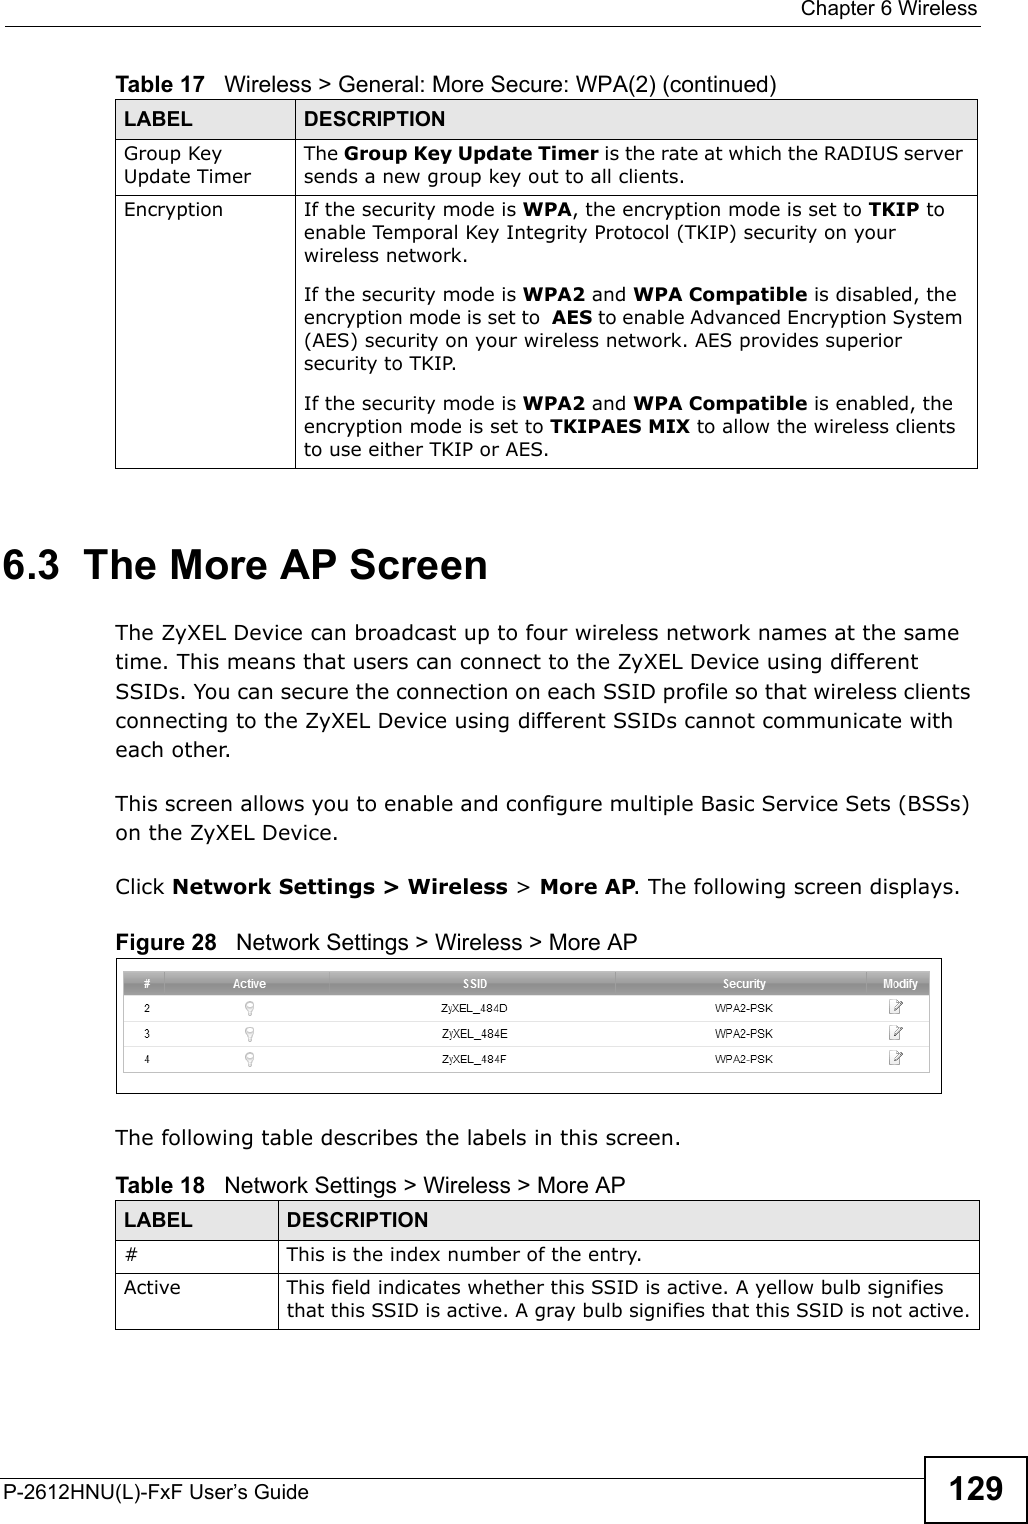  Chapter 6 WirelessP-2612HNU(L)-FxF User’s Guide 1296.3  The More AP ScreenThe ZyXEL Device can broadcast up to four wireless network names at the same time. This means that users can connect to the ZyXEL Device using differentSSIDs. You can secure the connection on each SSID profile so that wireless clientsconnecting to the ZyXEL Device using different SSIDs cannot communicate with each other.This screen allows you to enable and configure multiple Basic Service Sets (BSSs) on the ZyXEL Device.Click Network Settings &gt; Wireless &gt; More AP. The following screen displays.Figure 28   Network Settings &gt; Wireless &gt; More APThe following table describes the labels in this screen.Group Key Update TimerThe Group Key Update Timer is the rate at which the RADIUS server sends a new group key out to all clients. Encryption If the security mode is WPA, the encryption mode is set to TKIP to enable Temporal Key Integrity Protocol (TKIP) security on your wireless network. If the security mode is WPA2 and WPA Compatible is disabled, the encryption mode is set to  AES to enable Advanced Encryption System (AES) security on your wireless network. AES provides superiorsecurity to TKIP. If the security mode is WPA2 and WPA Compatible is enabled, theencryption mode is set to TKIPAES MIX to allow the wireless clients to use either TKIP or AES.Table 17   Wireless &gt; General: More Secure: WPA(2) (continued)LABEL DESCRIPTIONTable 18   Network Settings &gt; Wireless &gt; More APLABEL DESCRIPTION# This is the index number of the entry.Active This field indicates whether this SSID is active. A yellow bulb signifies that this SSID is active. A gray bulb signifies that this SSID is not active.